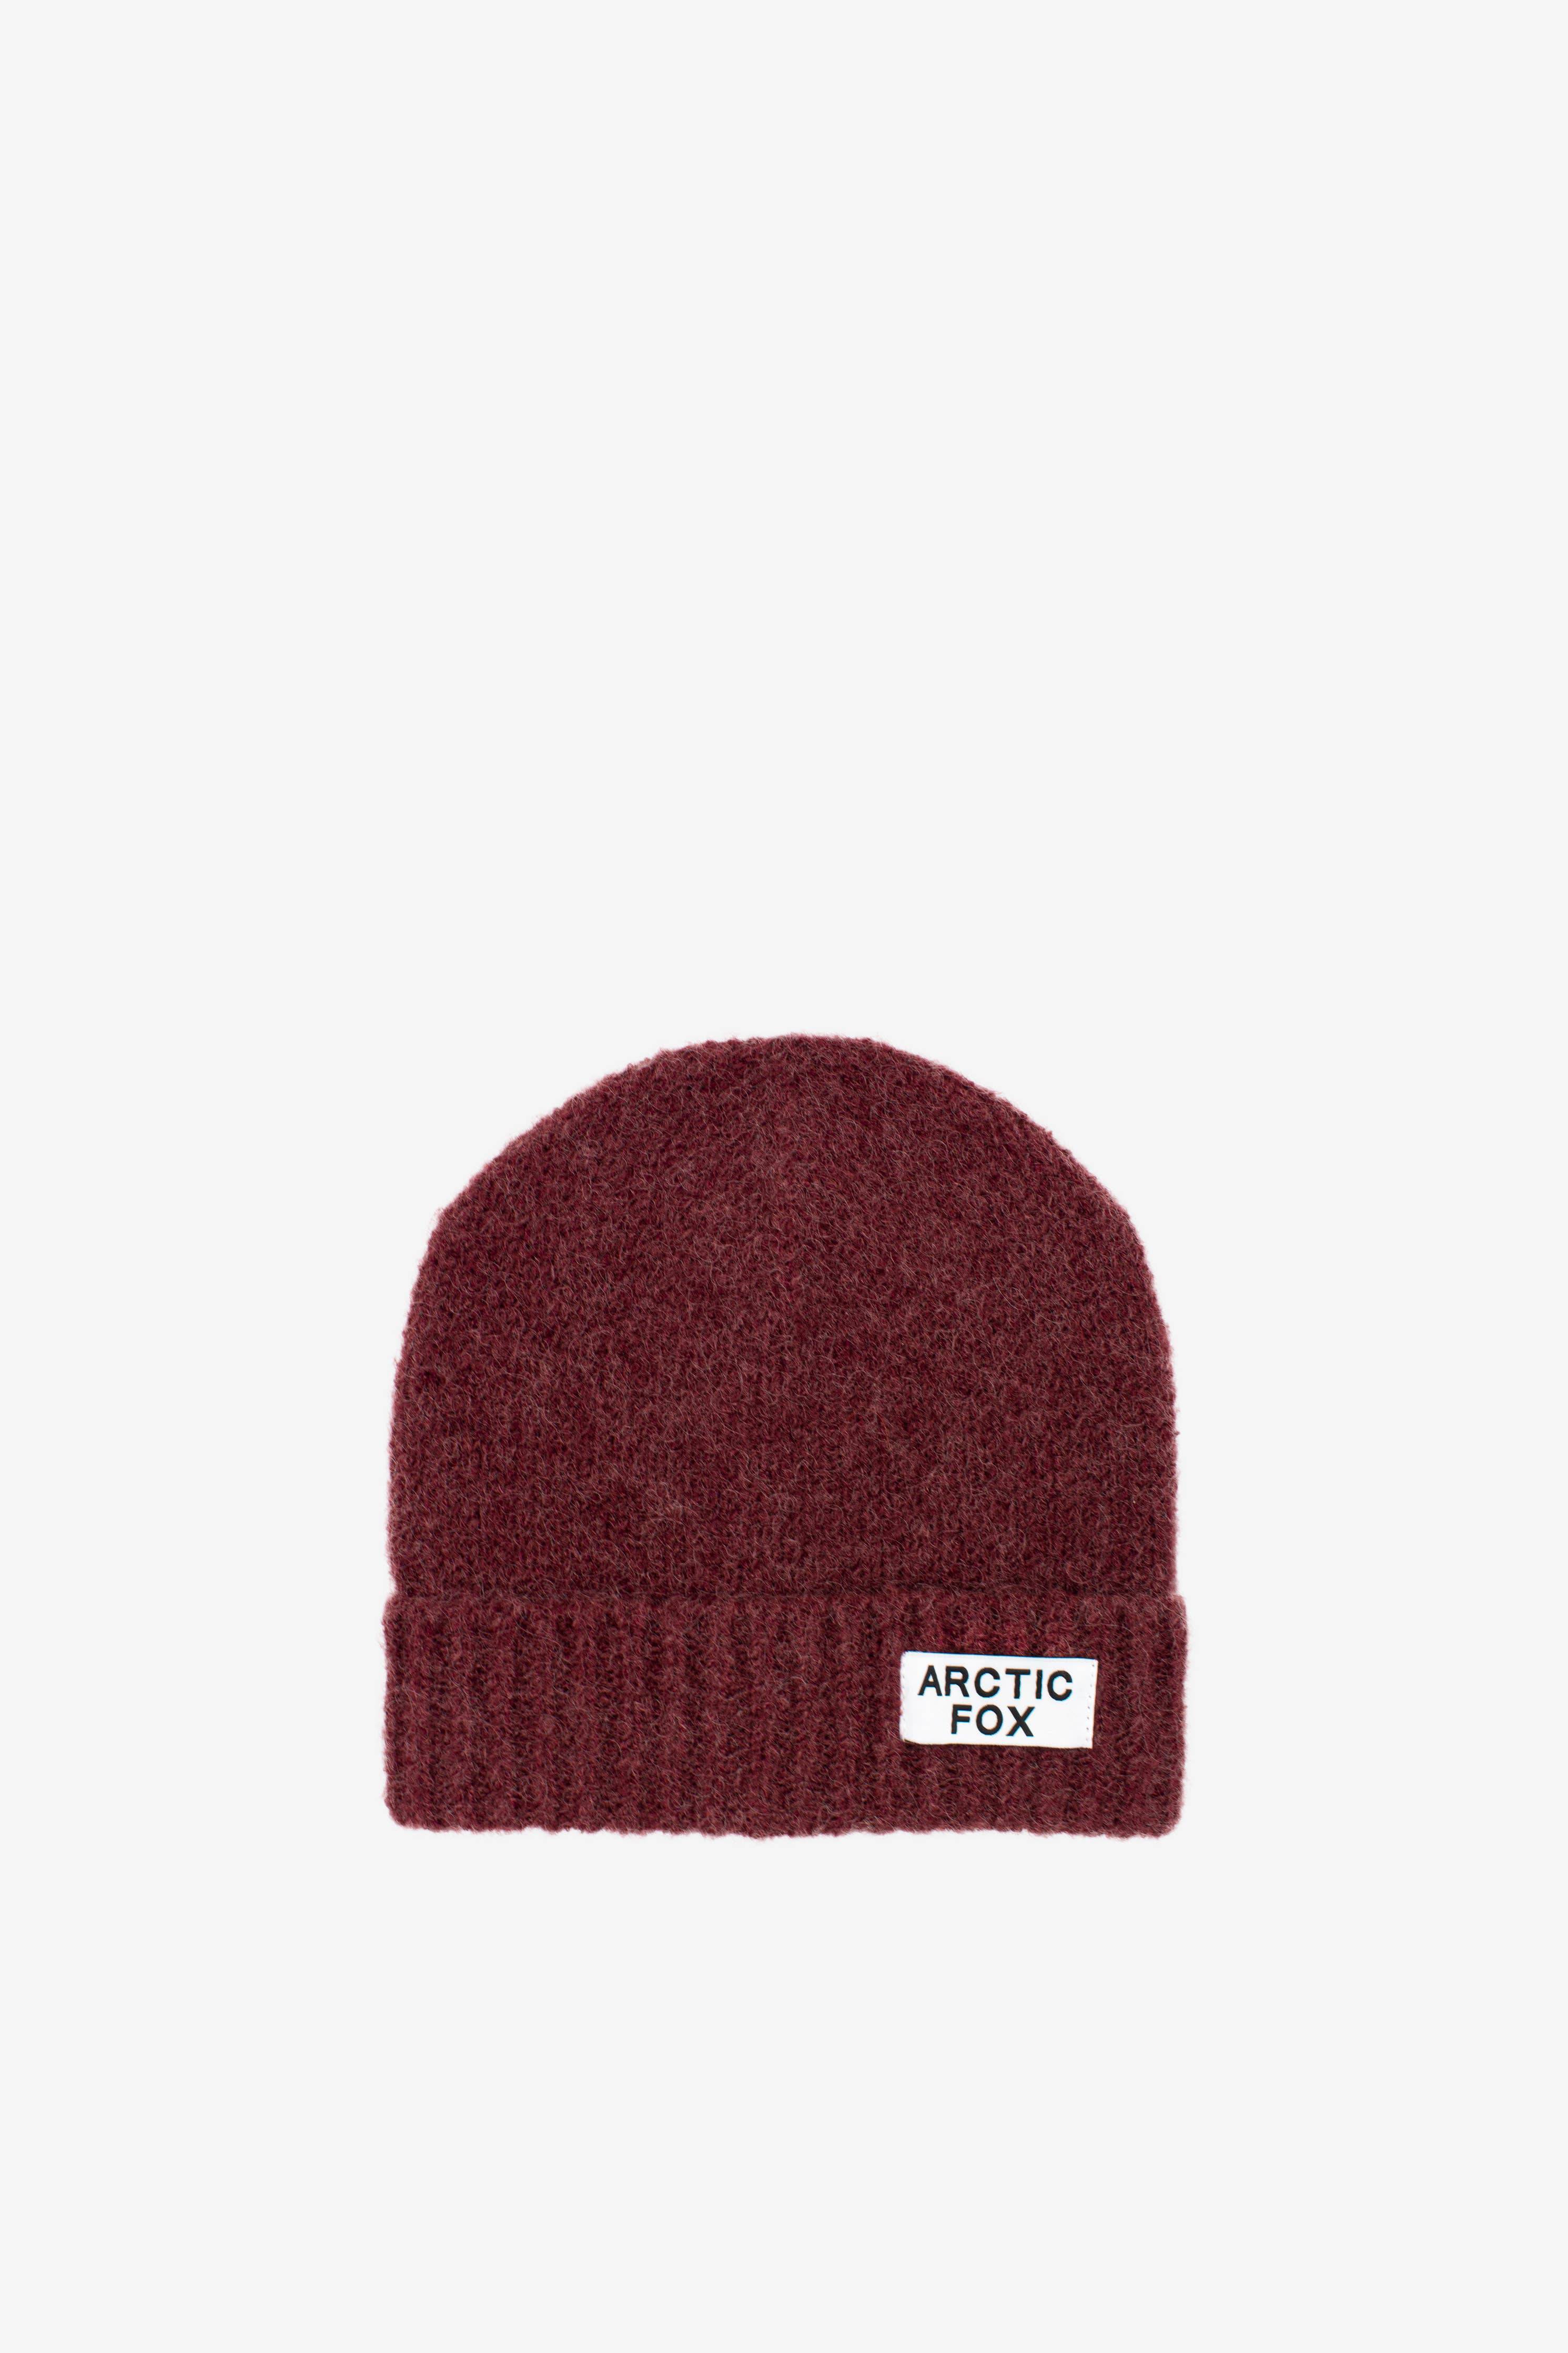 The Mohair Beanie - Bloodstone Red (new) - Out of the Blue